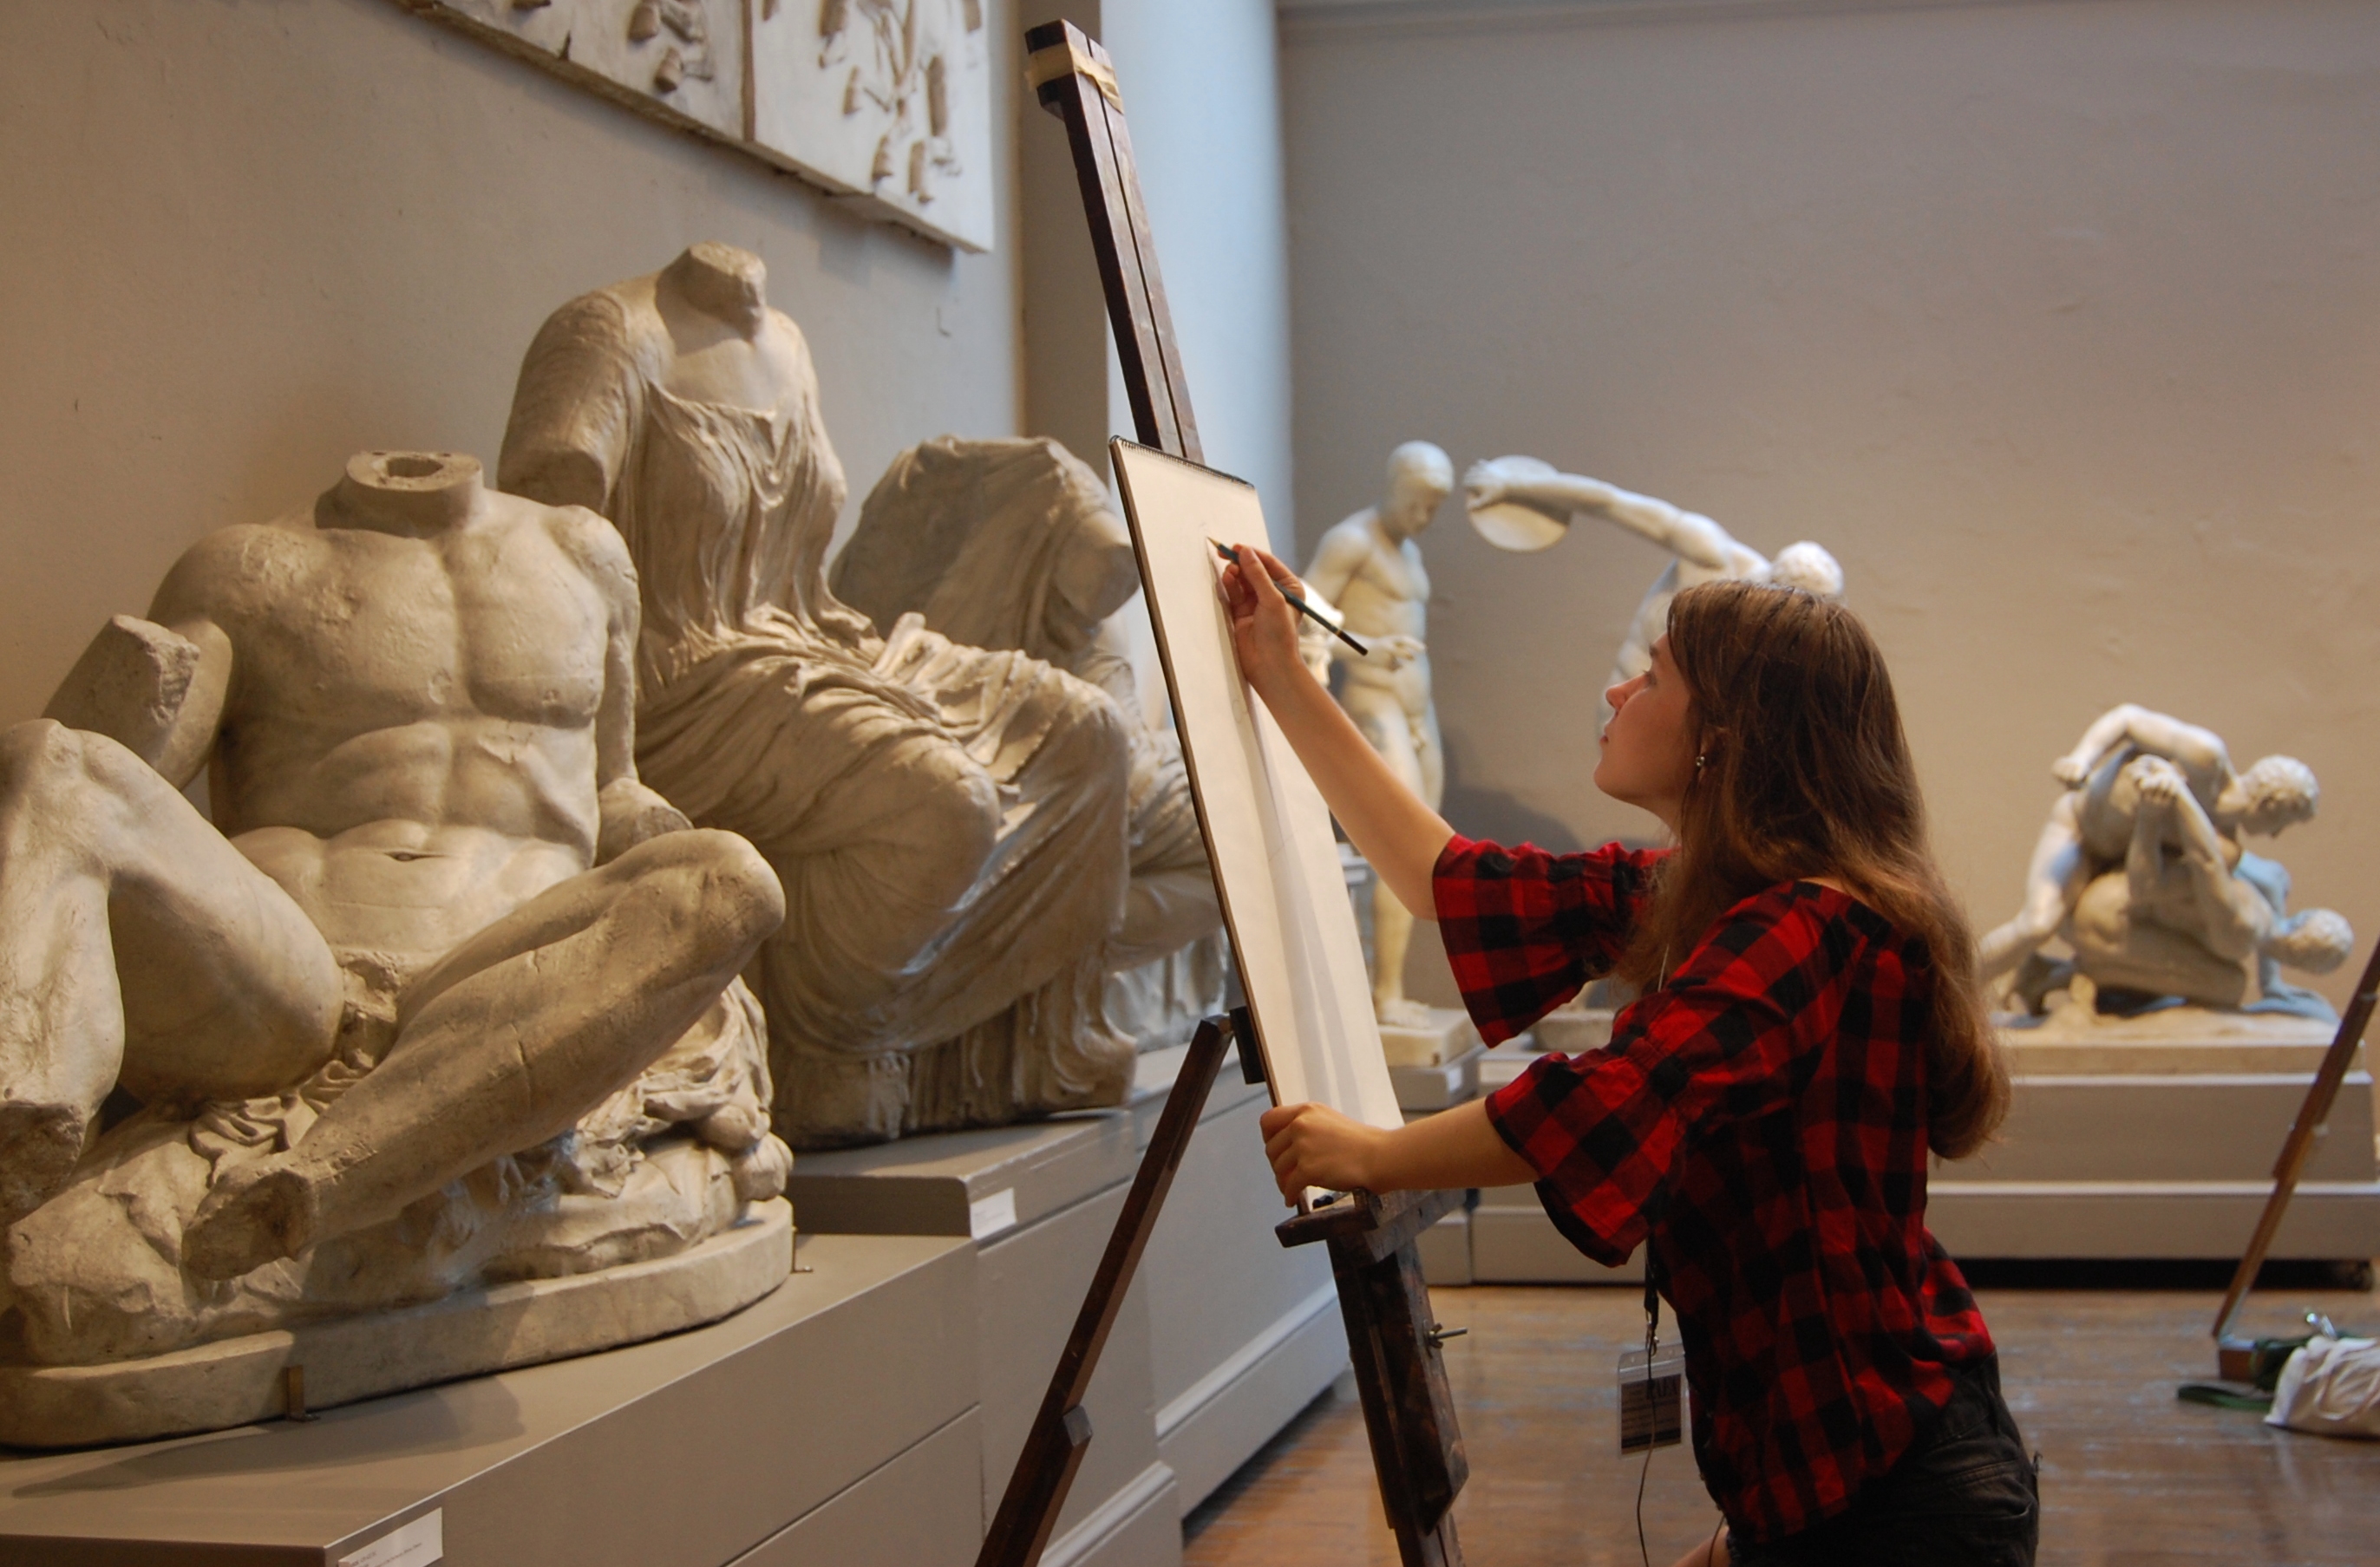 A student in a red and black plaid shirt draws on an easel in a room full of white plaster casts of classical statues